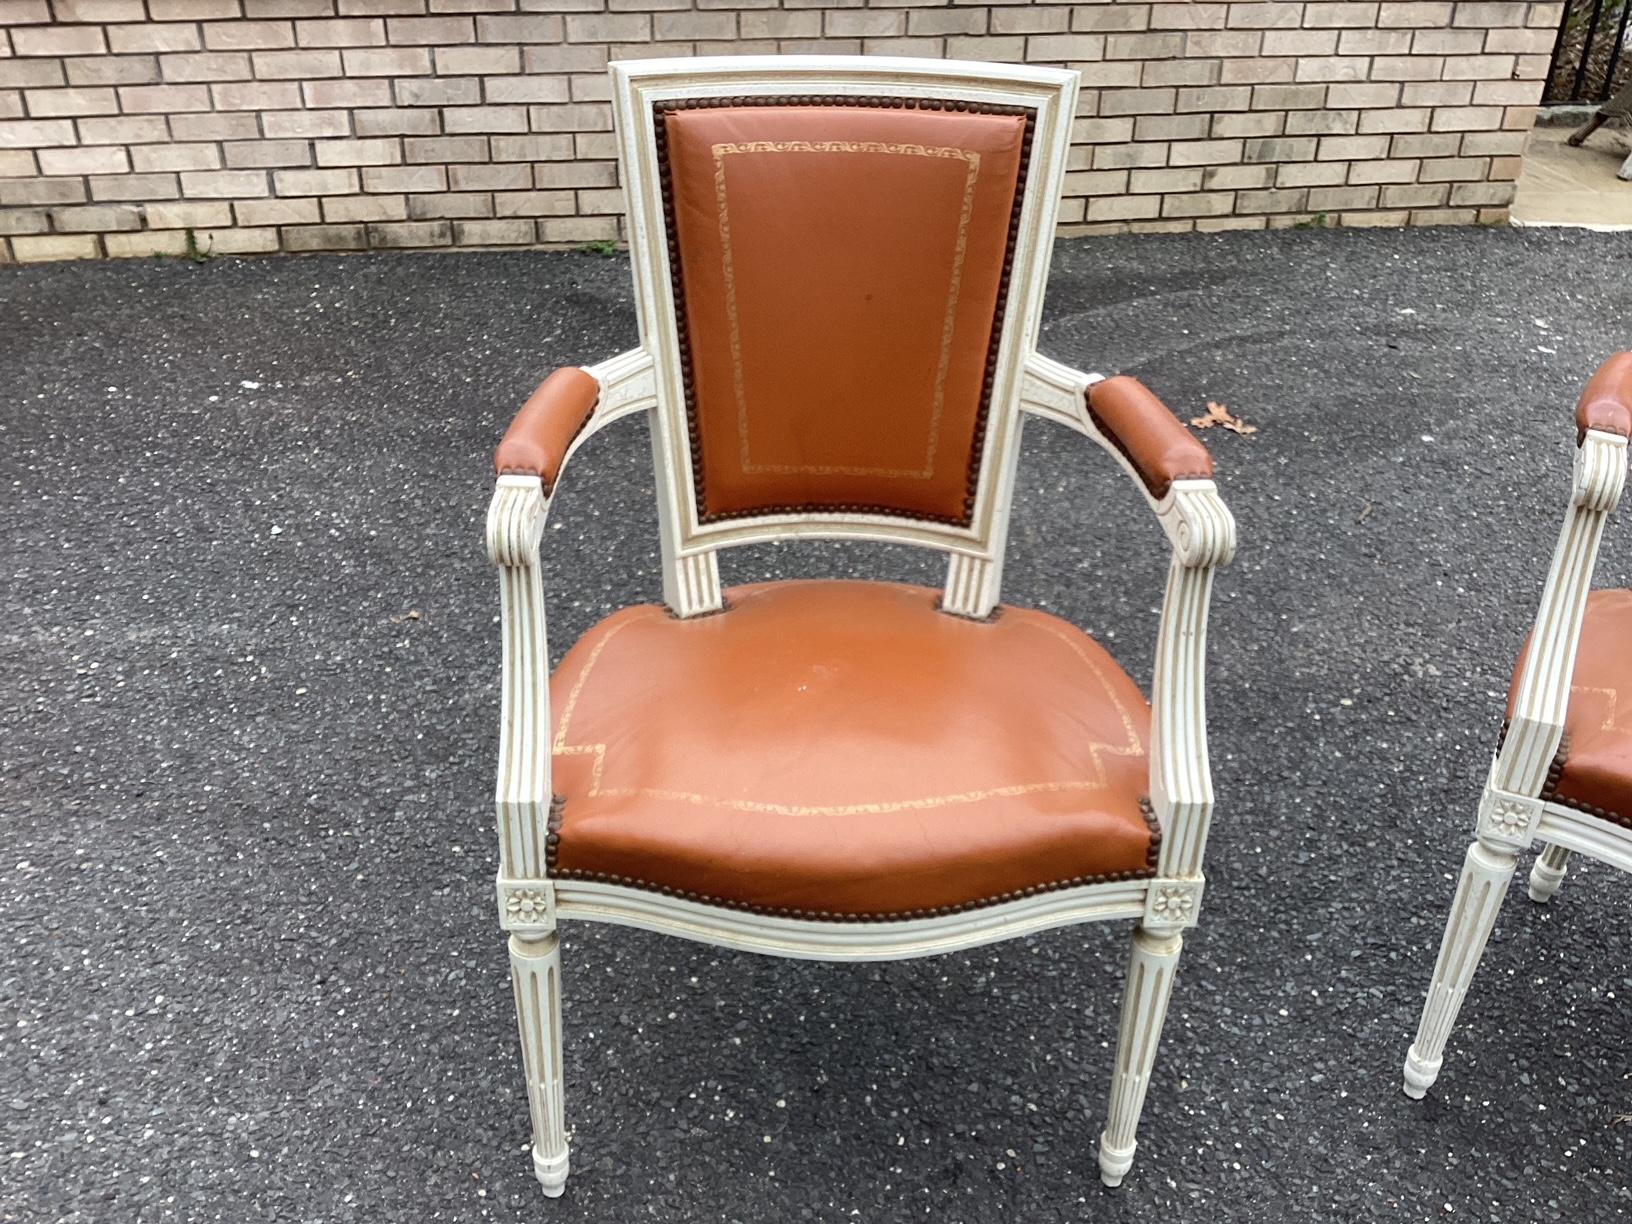 Classic pair of painted white Louis XVI style leather arm chairs featuring a square back with scalloped seat, straight fluted legs and carved floral motifs at the top of the legs. The upholstery is genuine cowhide leather in a caramel tone with gold